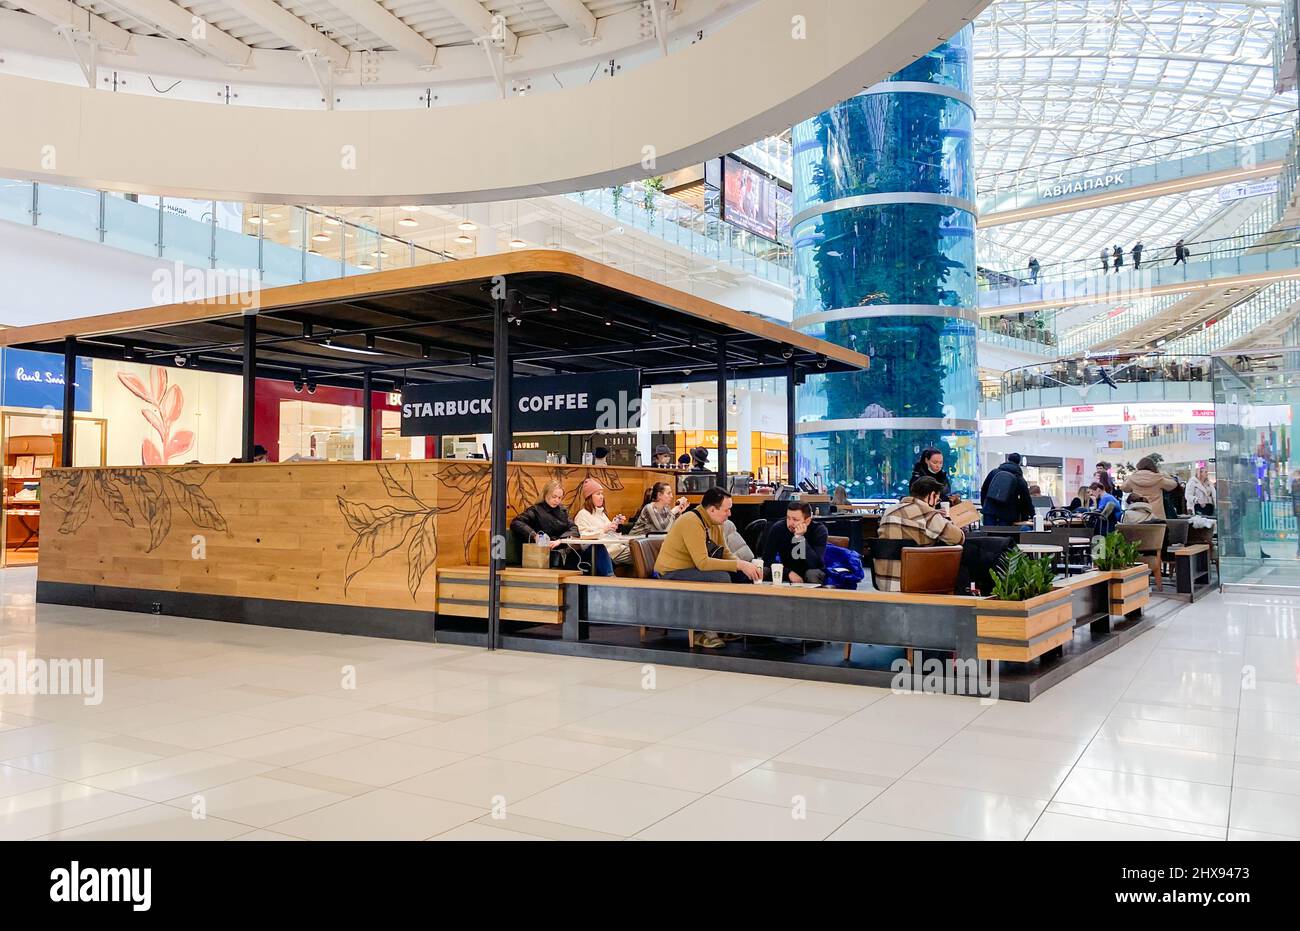 Moscow, Russia, March 2022: Starbuck Coffee in a shopping mall. People are sitting, speaking, drinking coffee, surfing the web, eating. Stock Photo